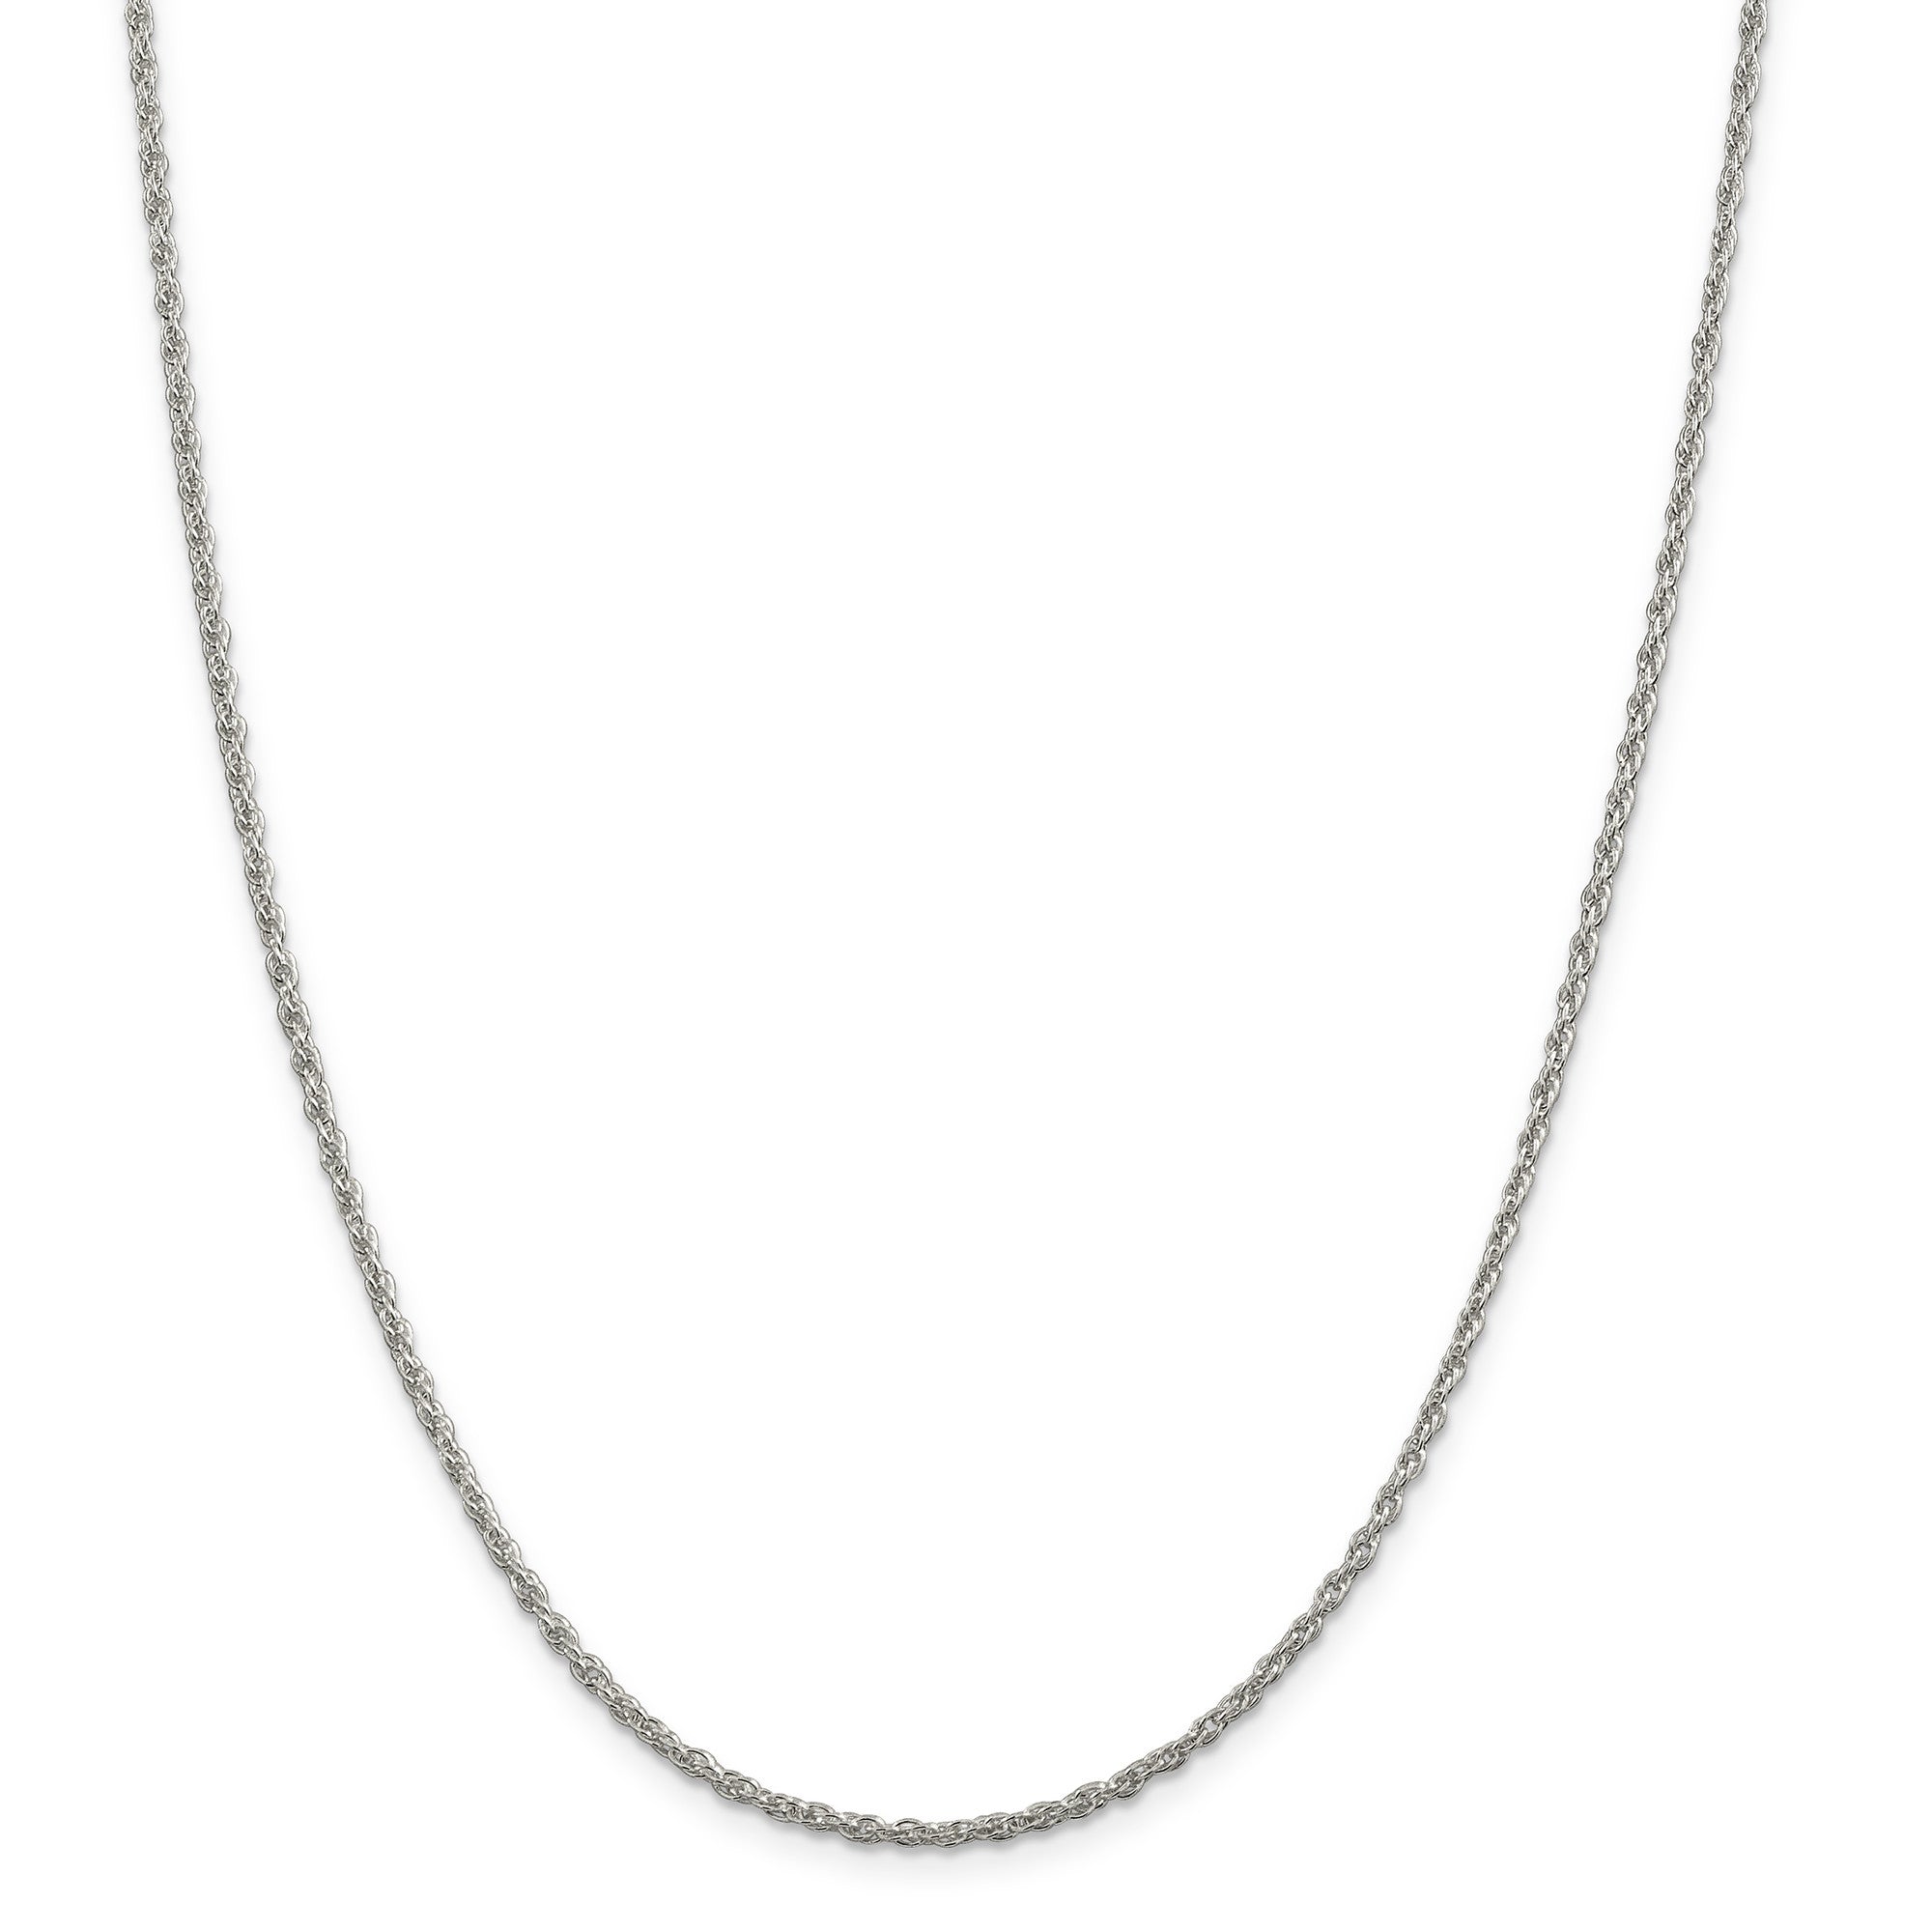 Sterling Silver 2-Inch Cable Chain Extender with 4.0mm Bead and